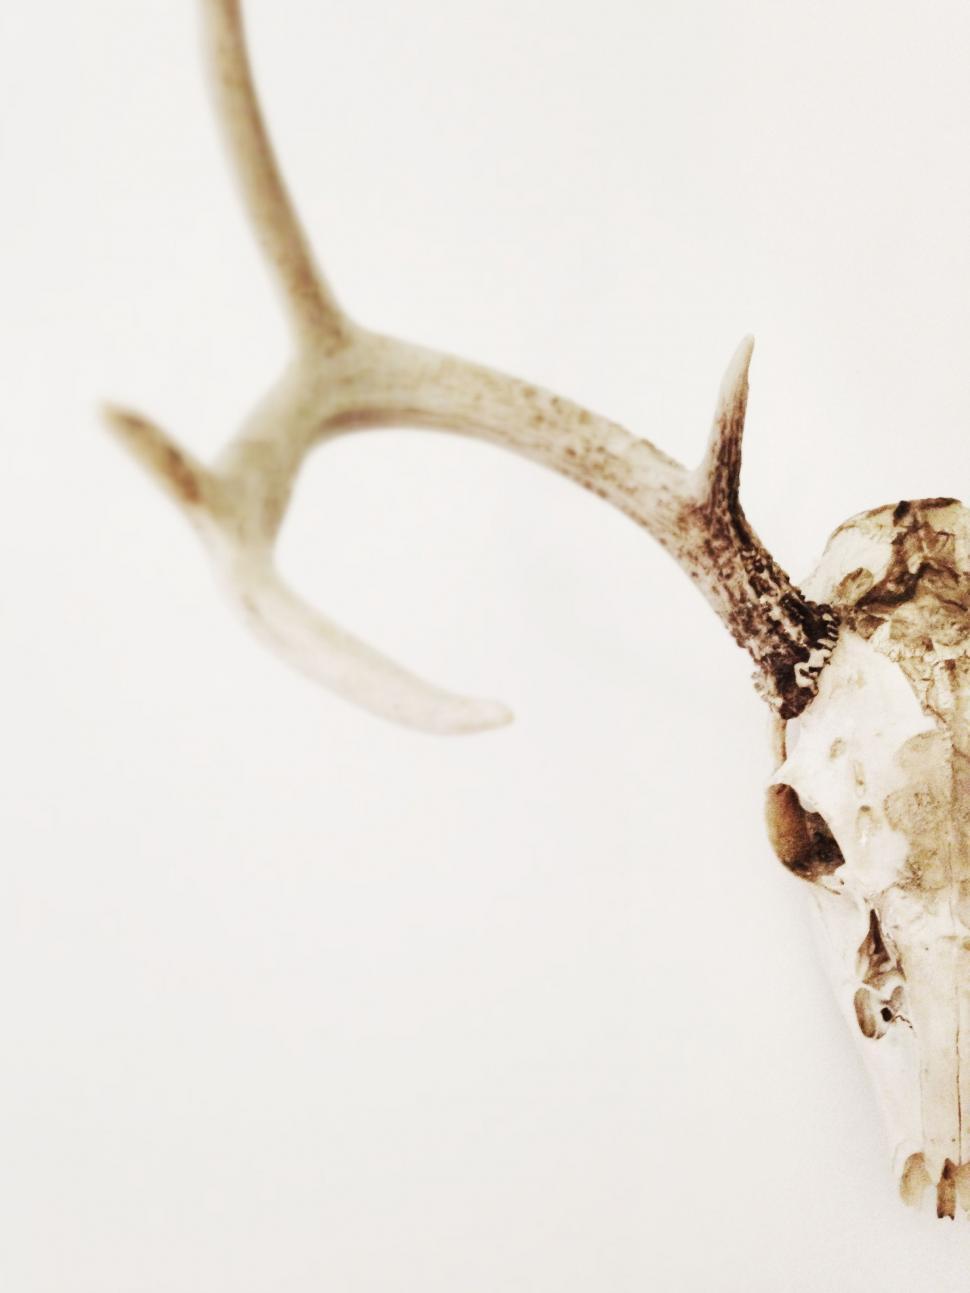 Free Image of Close Up of Deer Skull With Antlers 